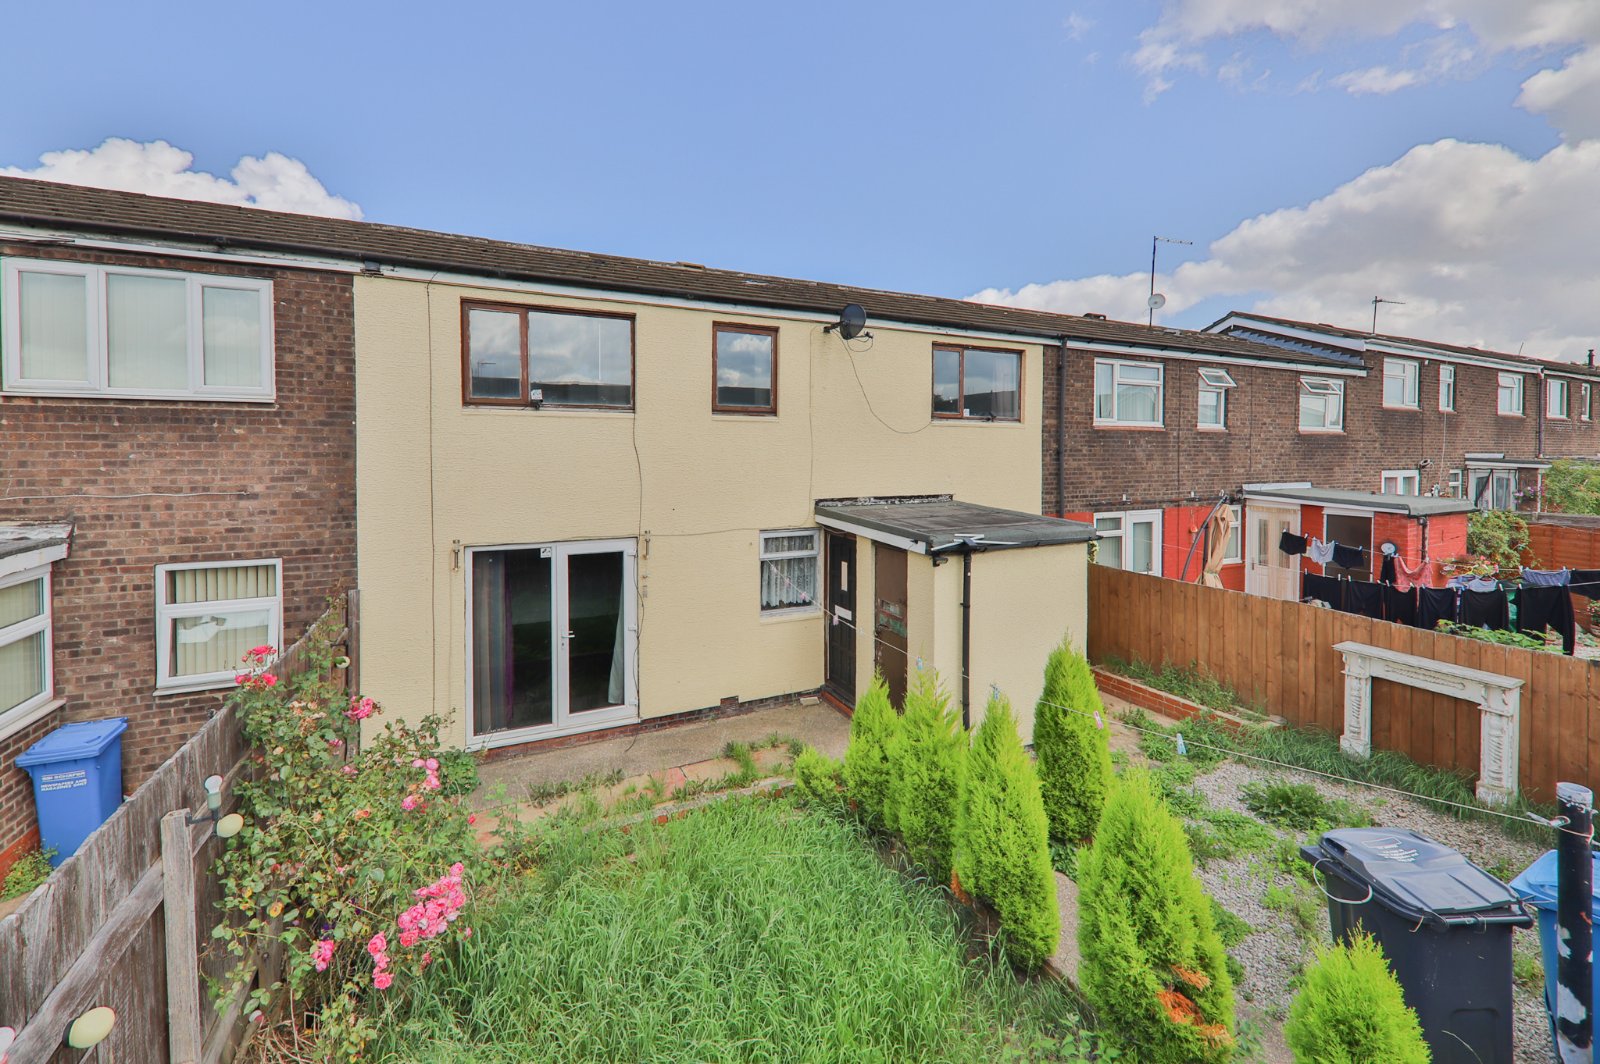 3 bed house for sale in Sheldon Close, Bransholme 0